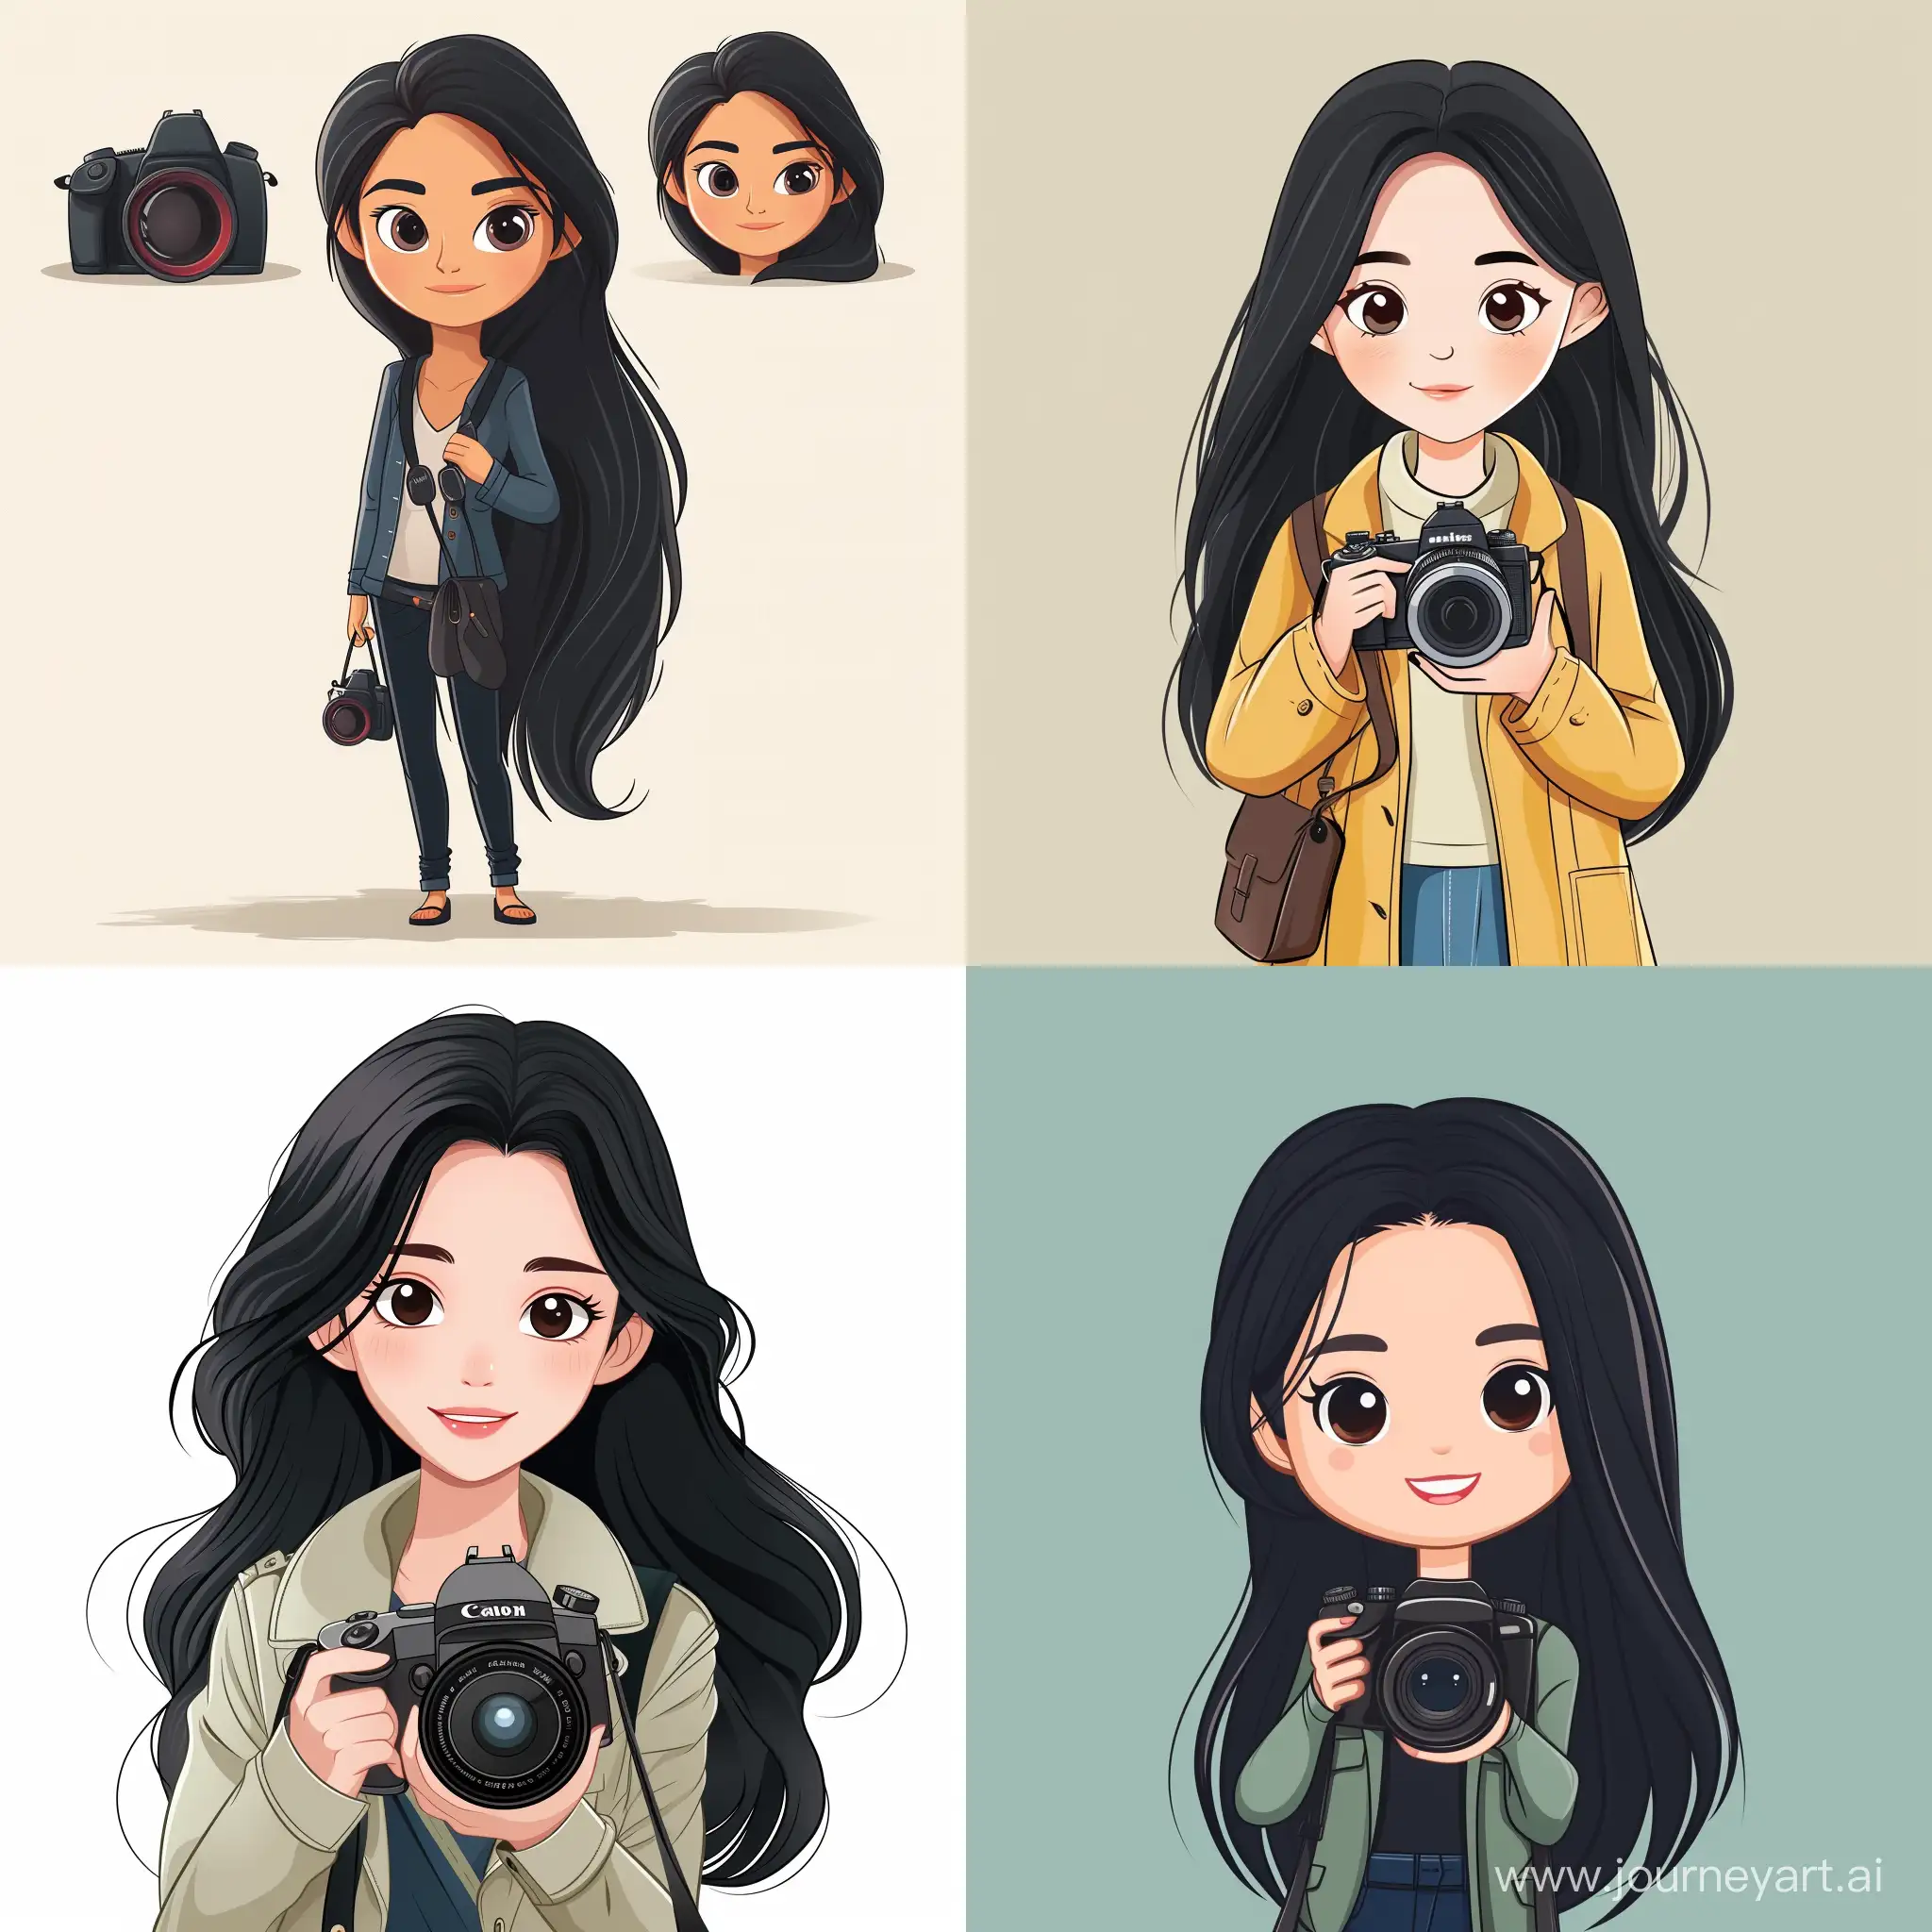 the character of a photographer woman with long black hair, in cartoon vector style, high quality details